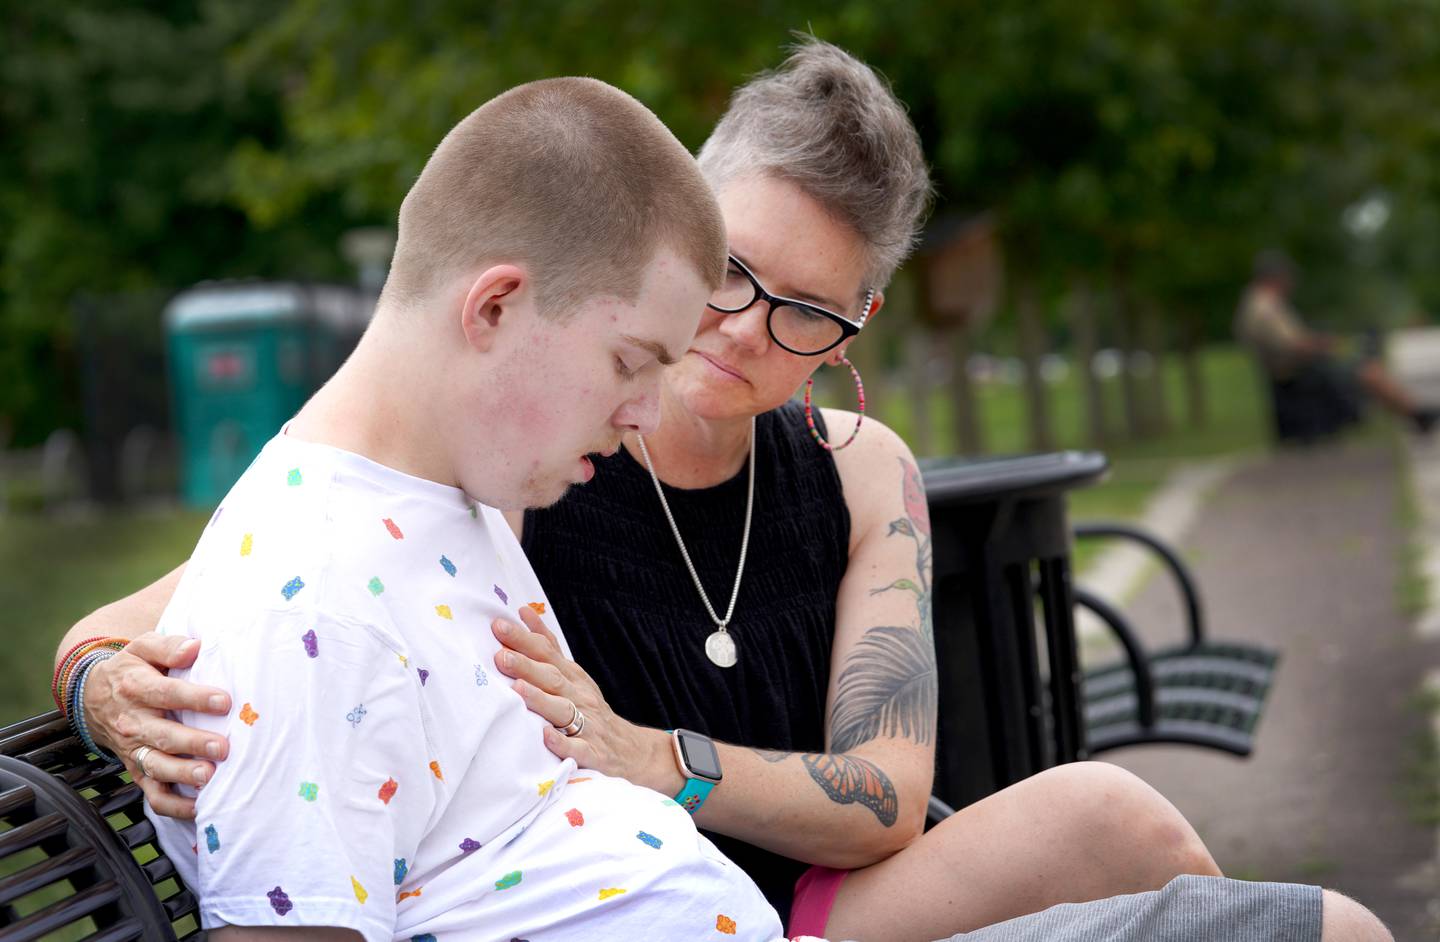 Noah Godfrey takes a moment to rest on a bench with his mother, Sunday Stilwell, in Glasgow Regional Park in Delaware.